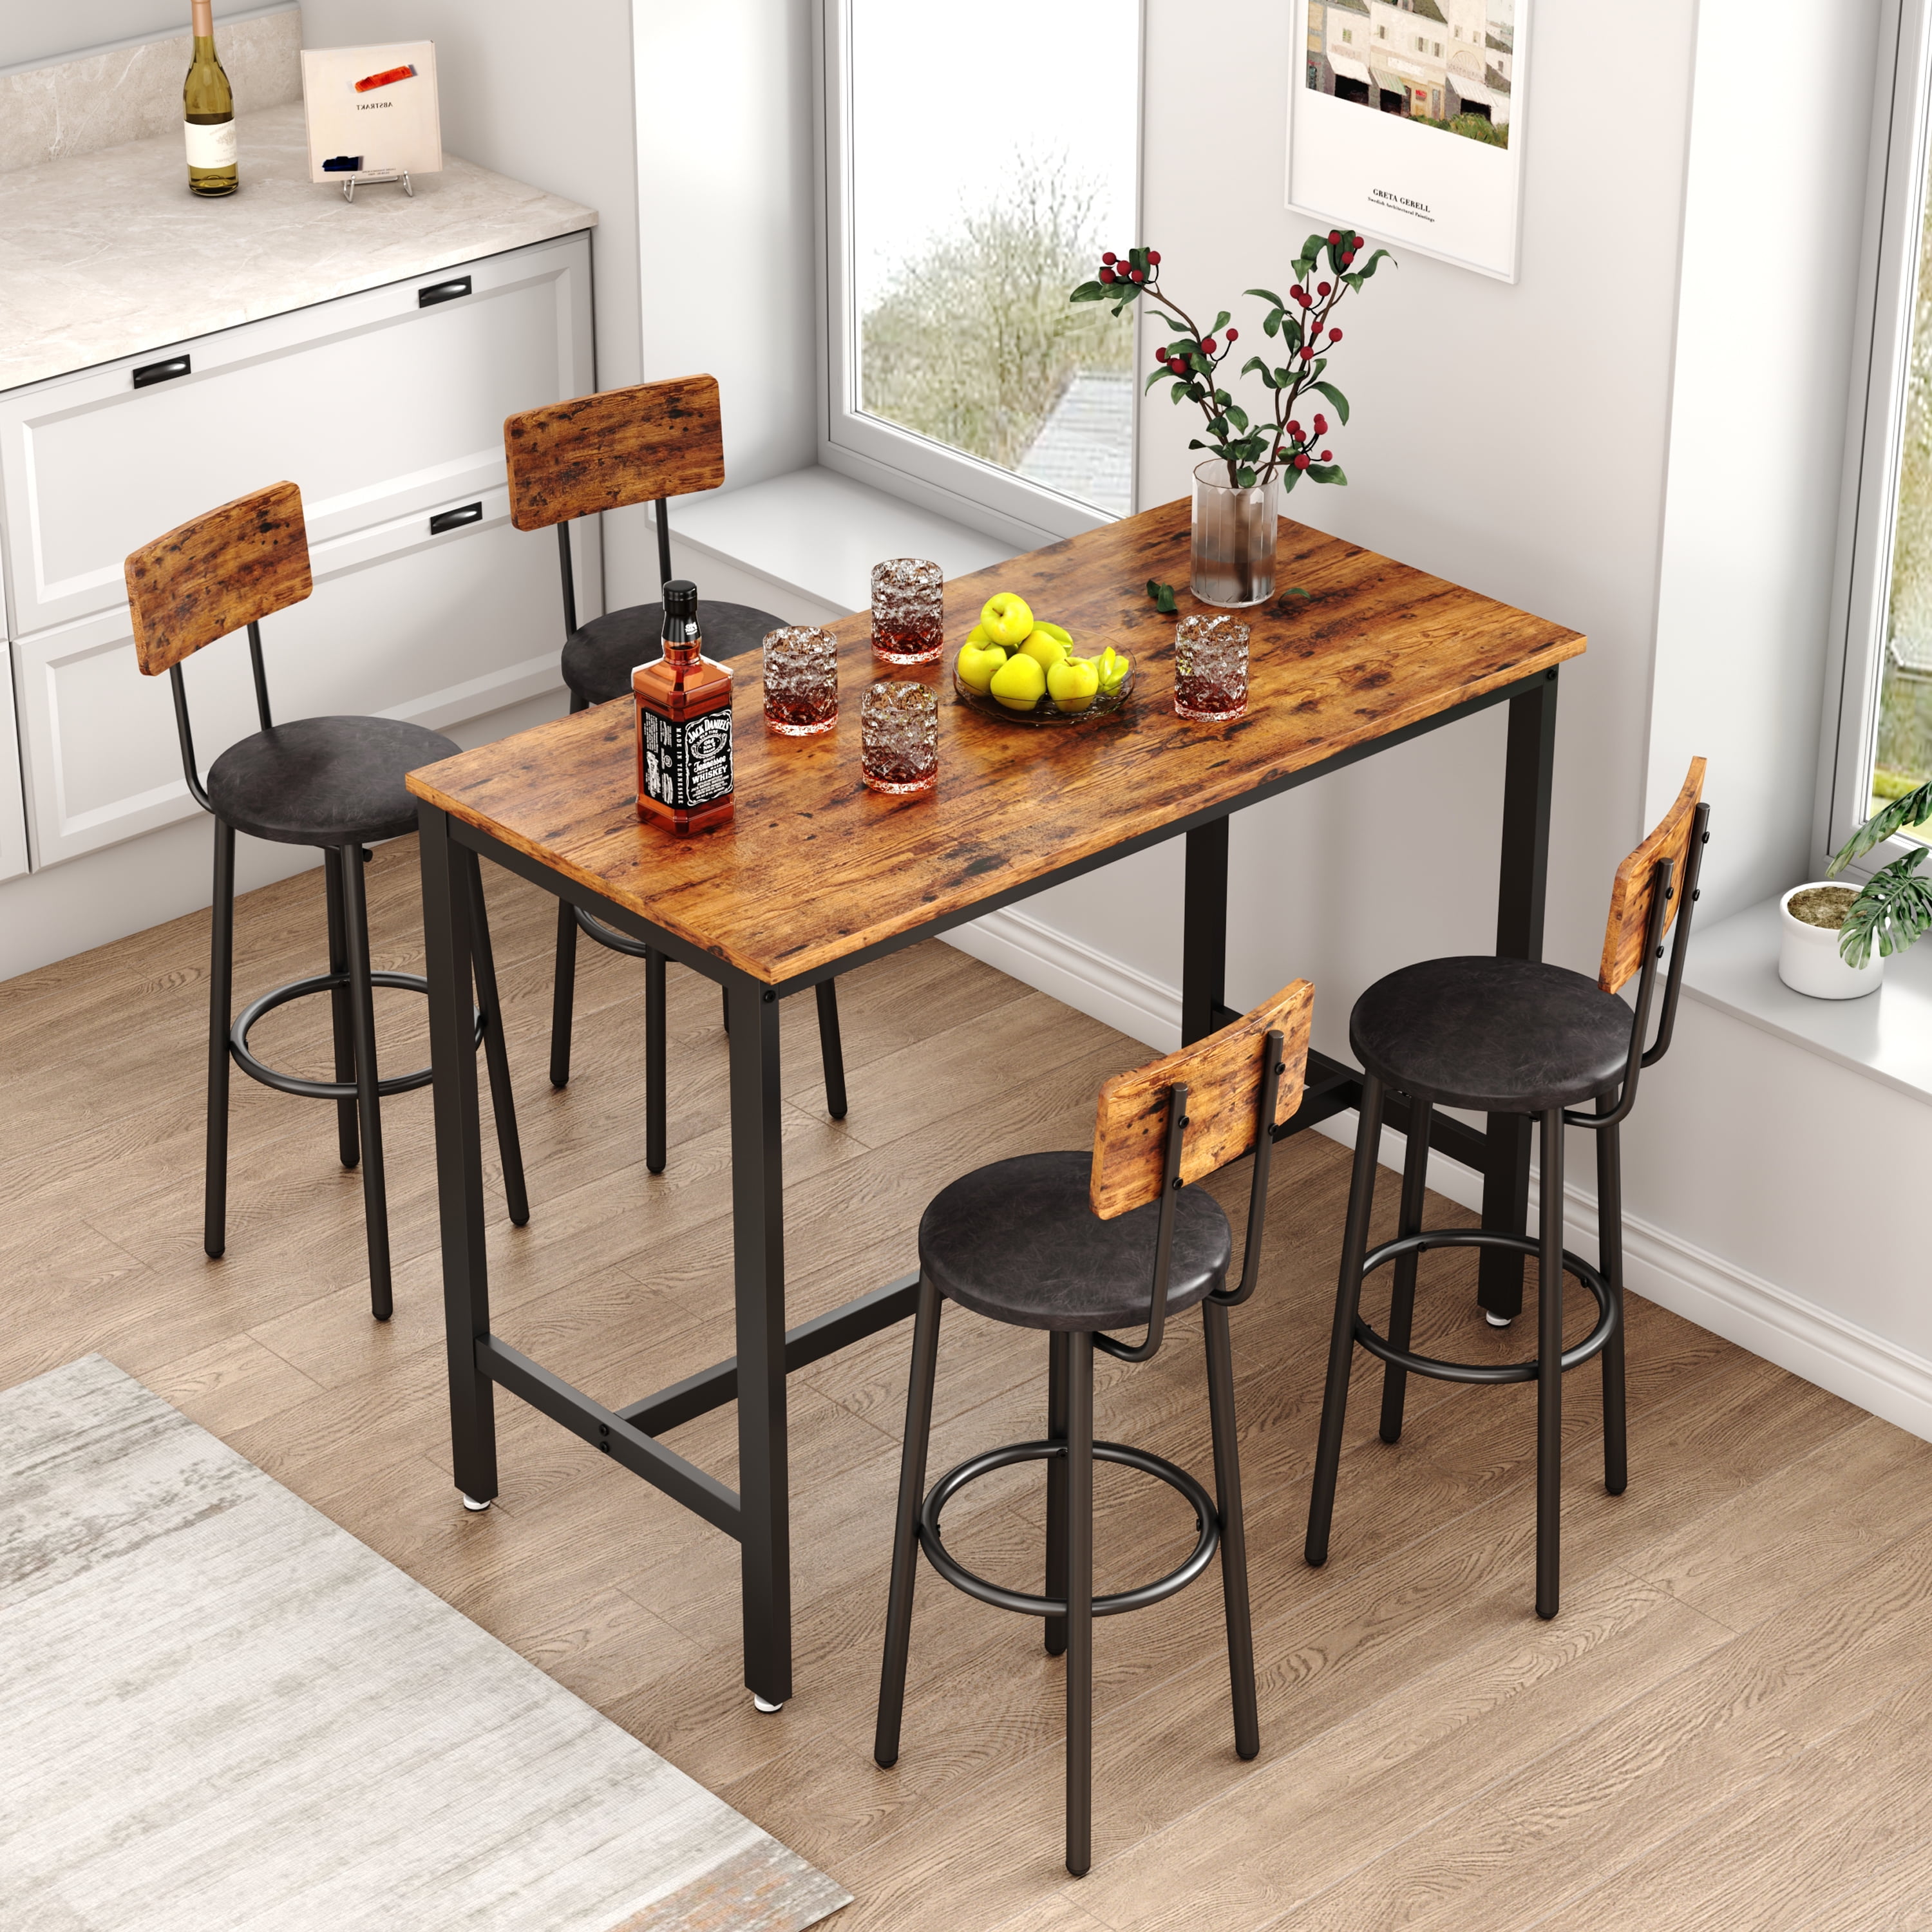 5 piece dining set, modern dining table and chairs set for 4, kitchen  counter height dining table set with 4 upholstered chairs, for small space,